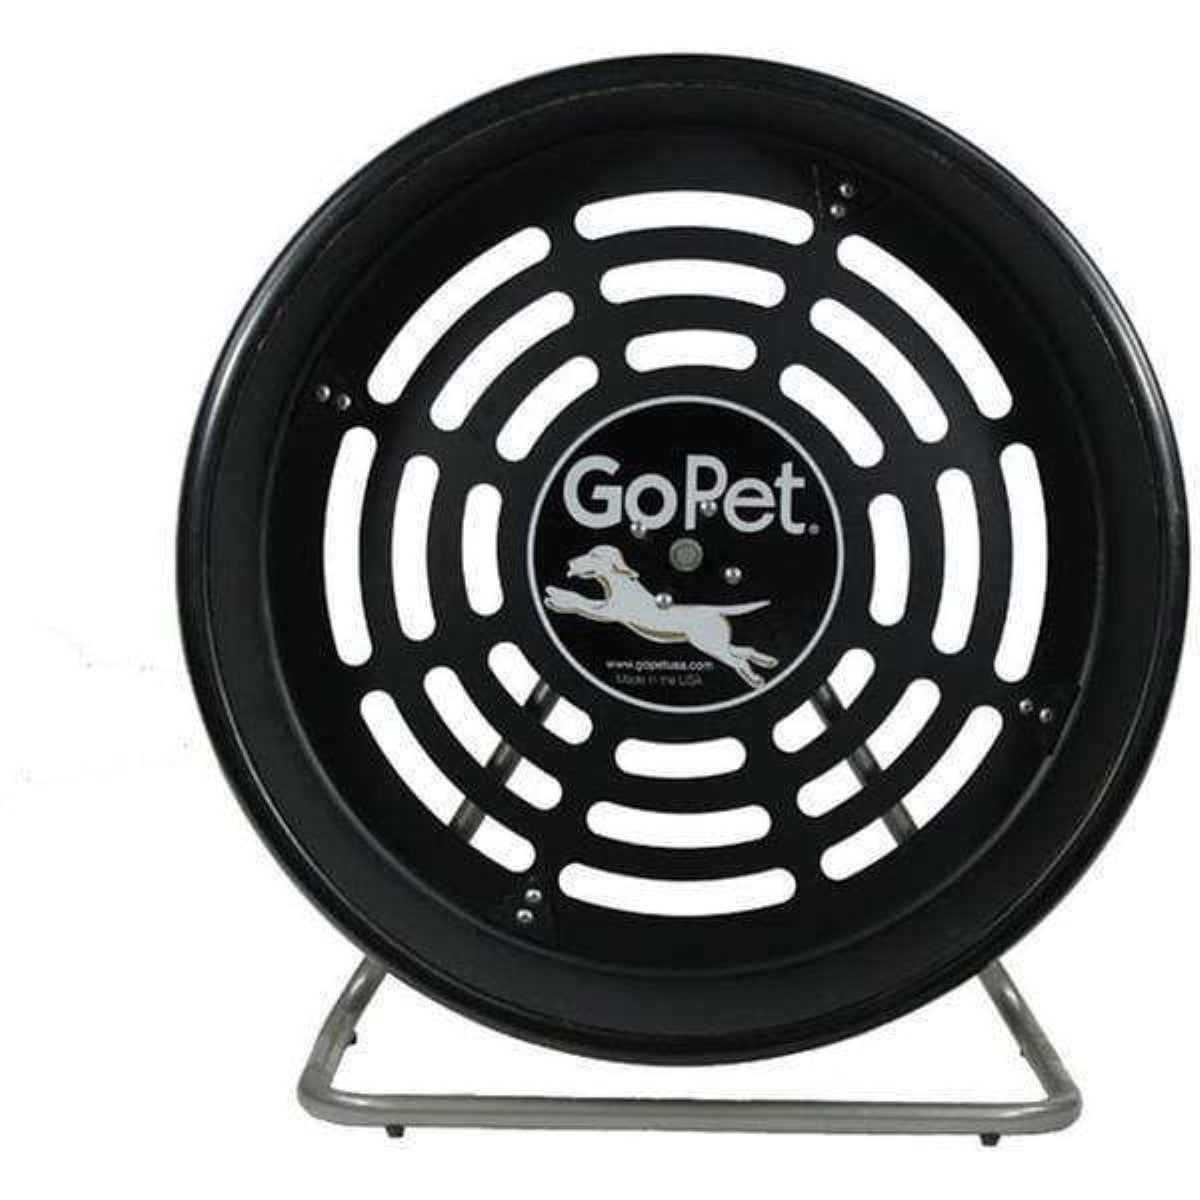 GoPet TreadWheel for Dogs & Cats - 2 Sizes Available